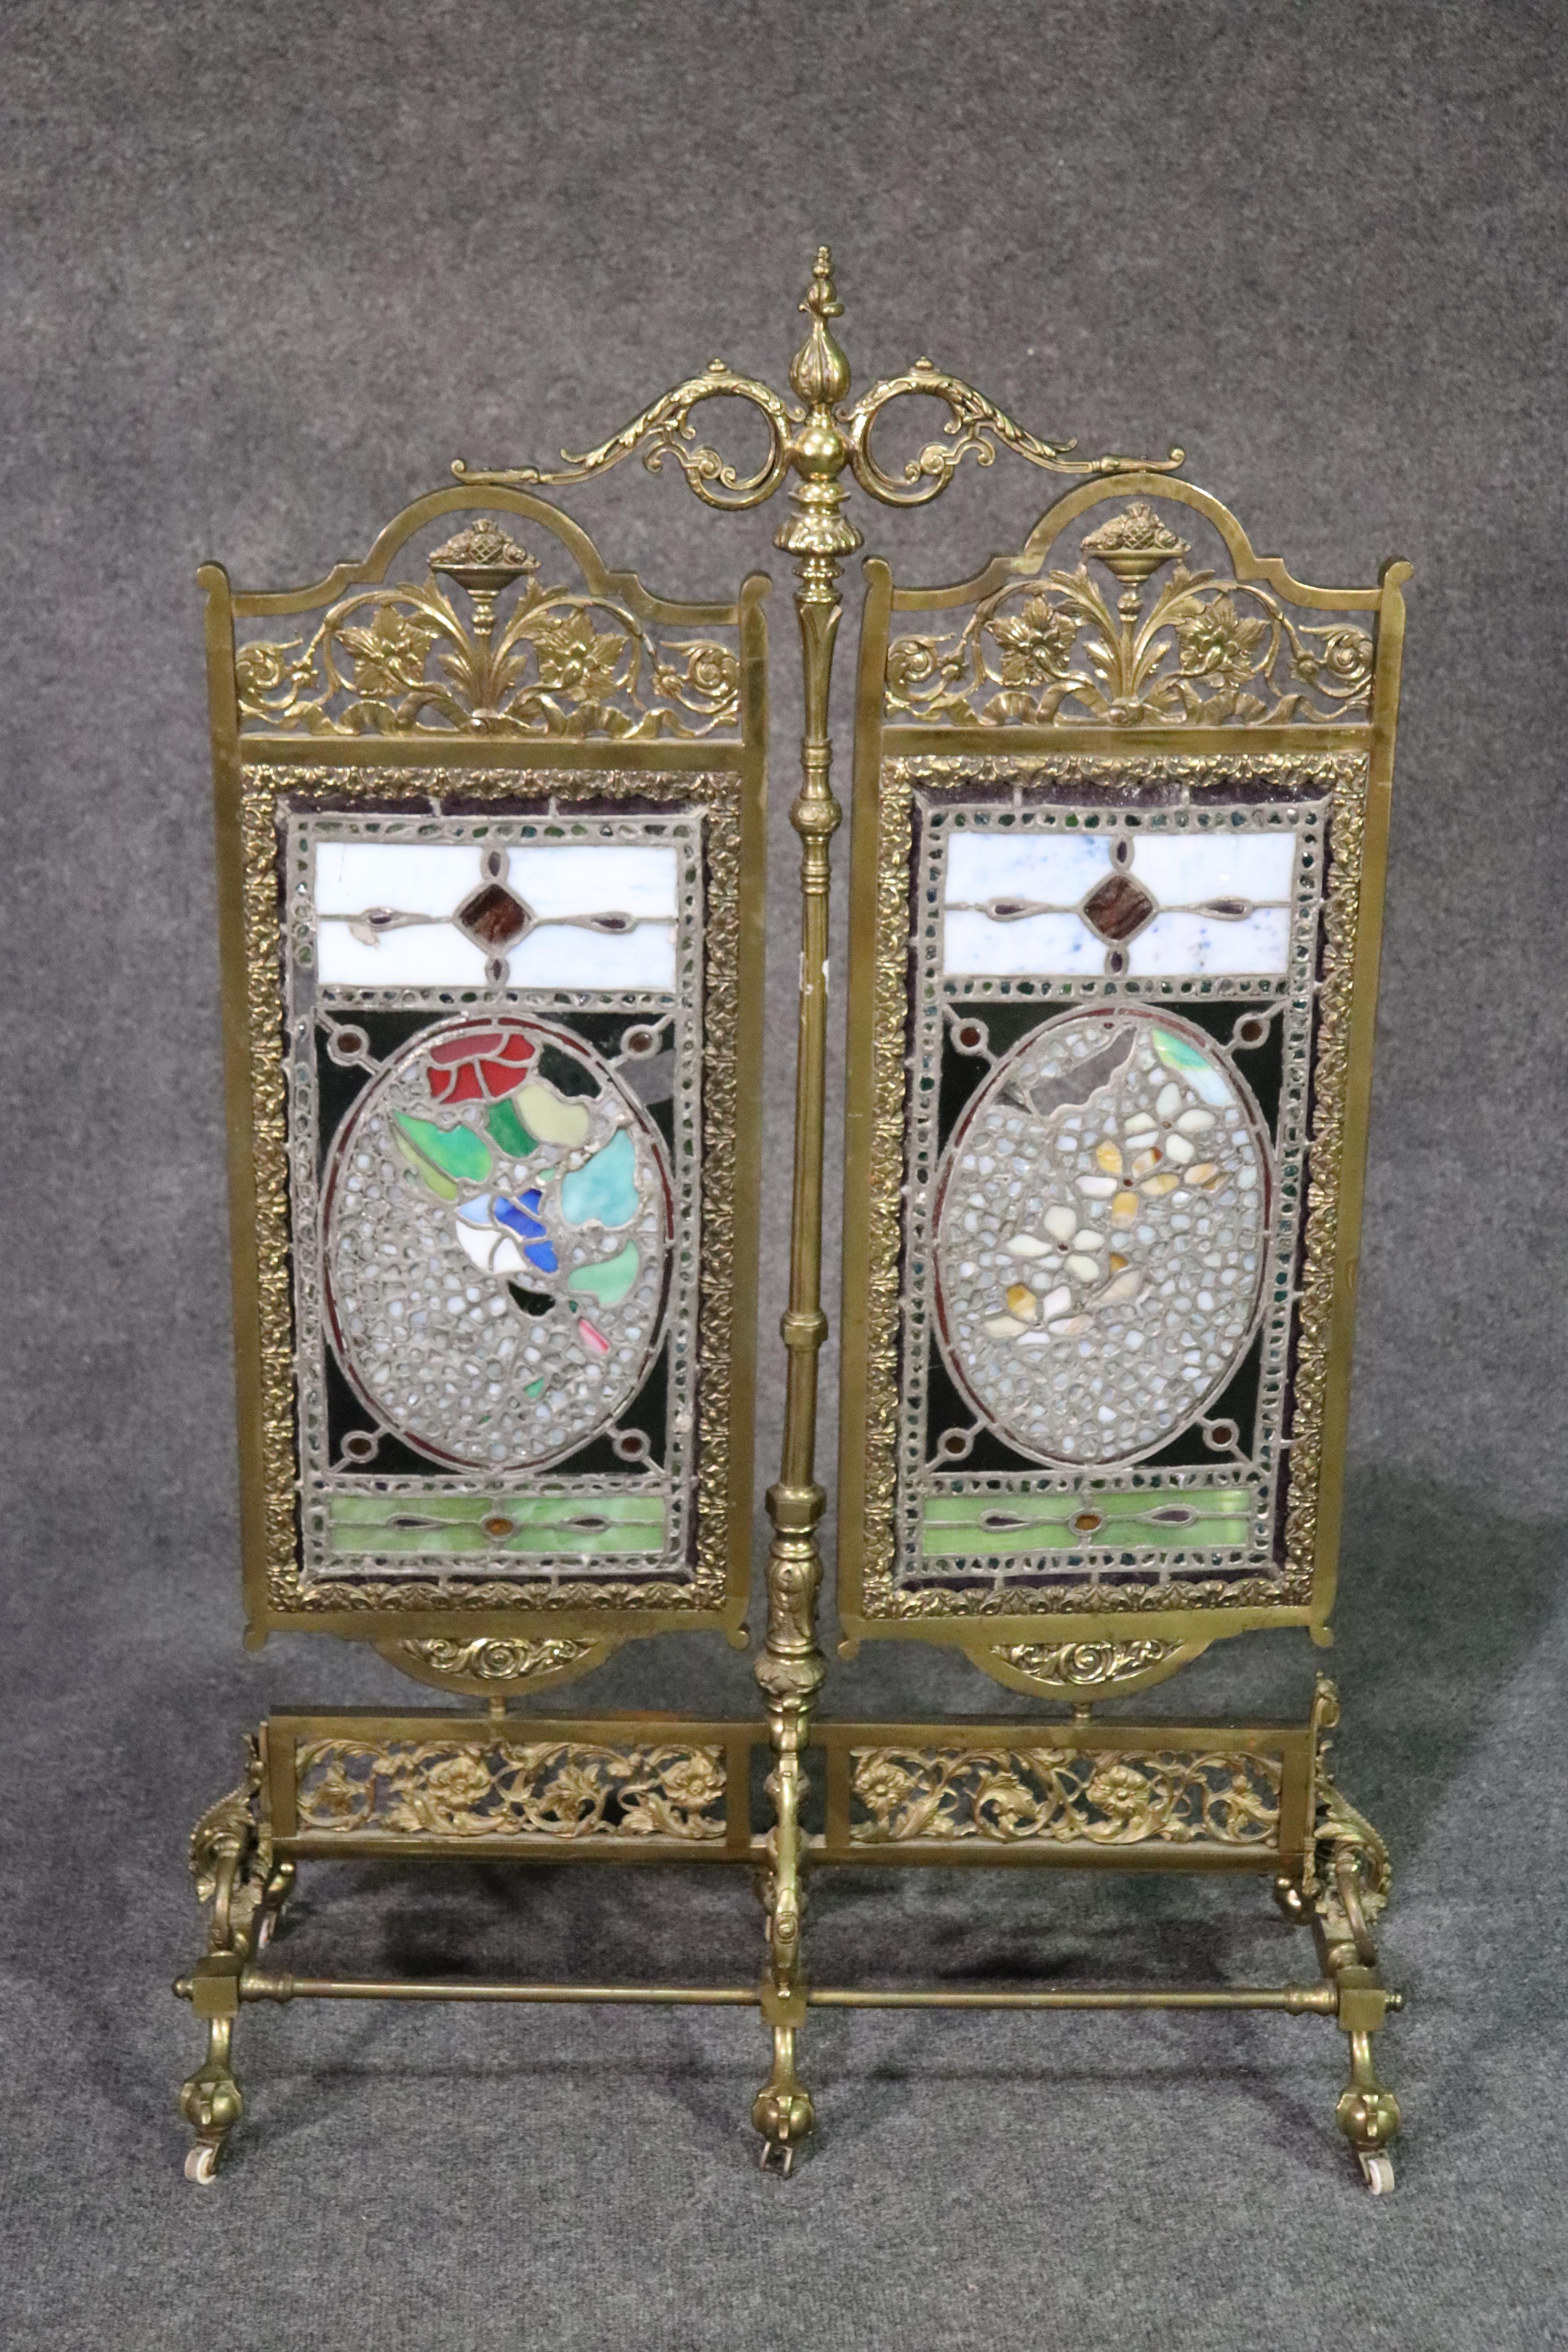 This is a very rare and unique American Victorian stained glass firescreen. The articulating moving panels depicting flowers and jeweled pieces of stained glass. Two small stained glass pieces are missing. The frame is done in the finest cast brass